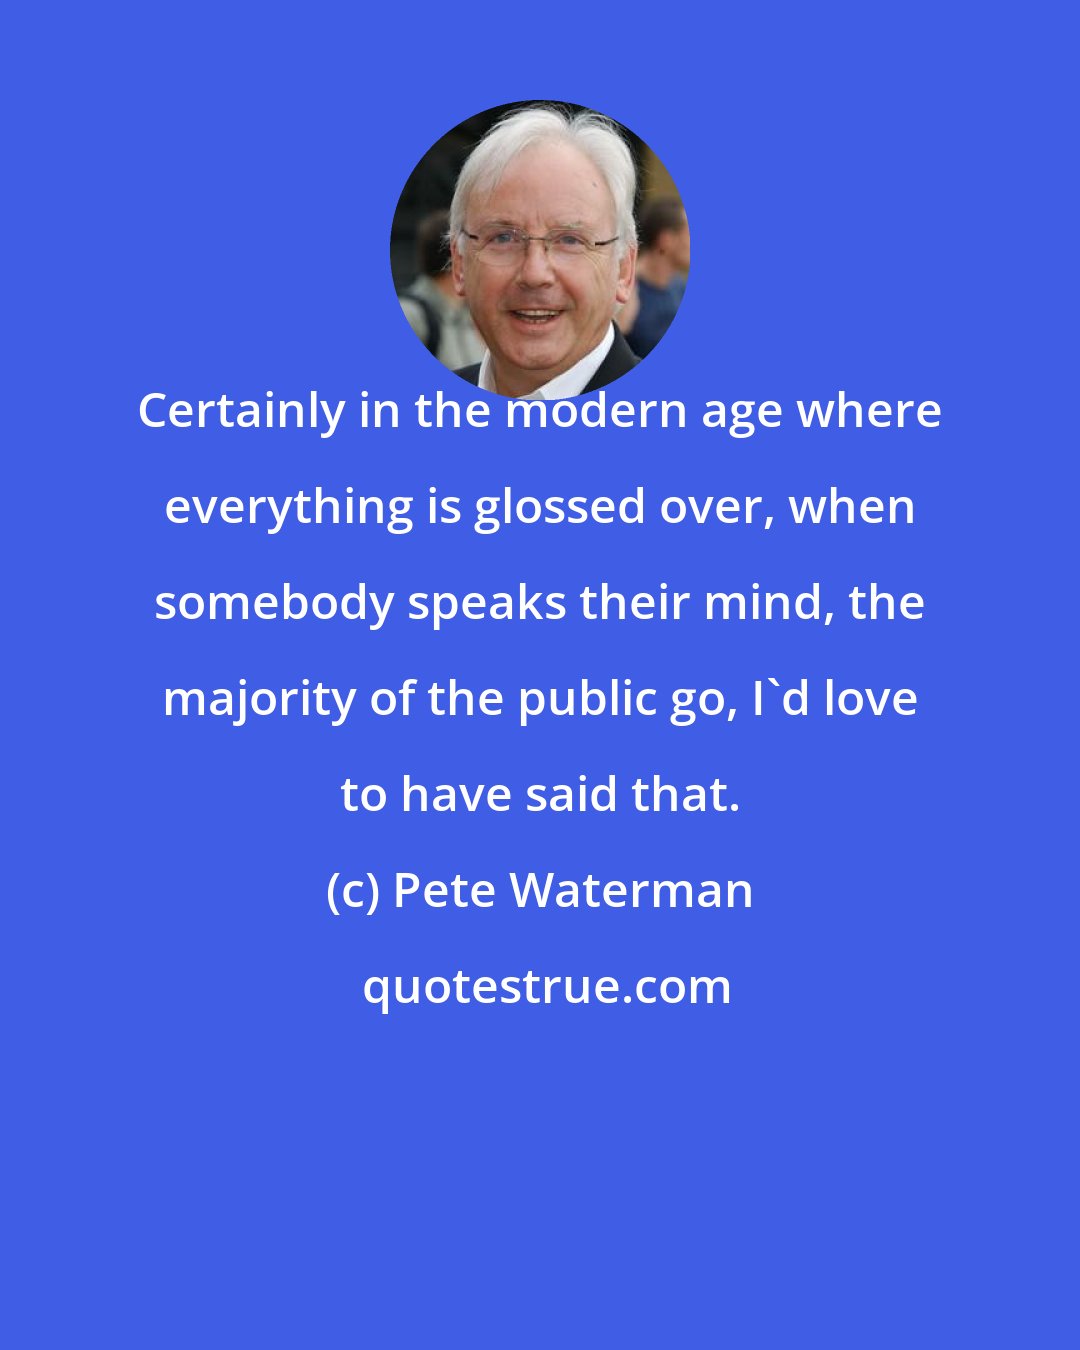 Pete Waterman: Certainly in the modern age where everything is glossed over, when somebody speaks their mind, the majority of the public go, I'd love to have said that.